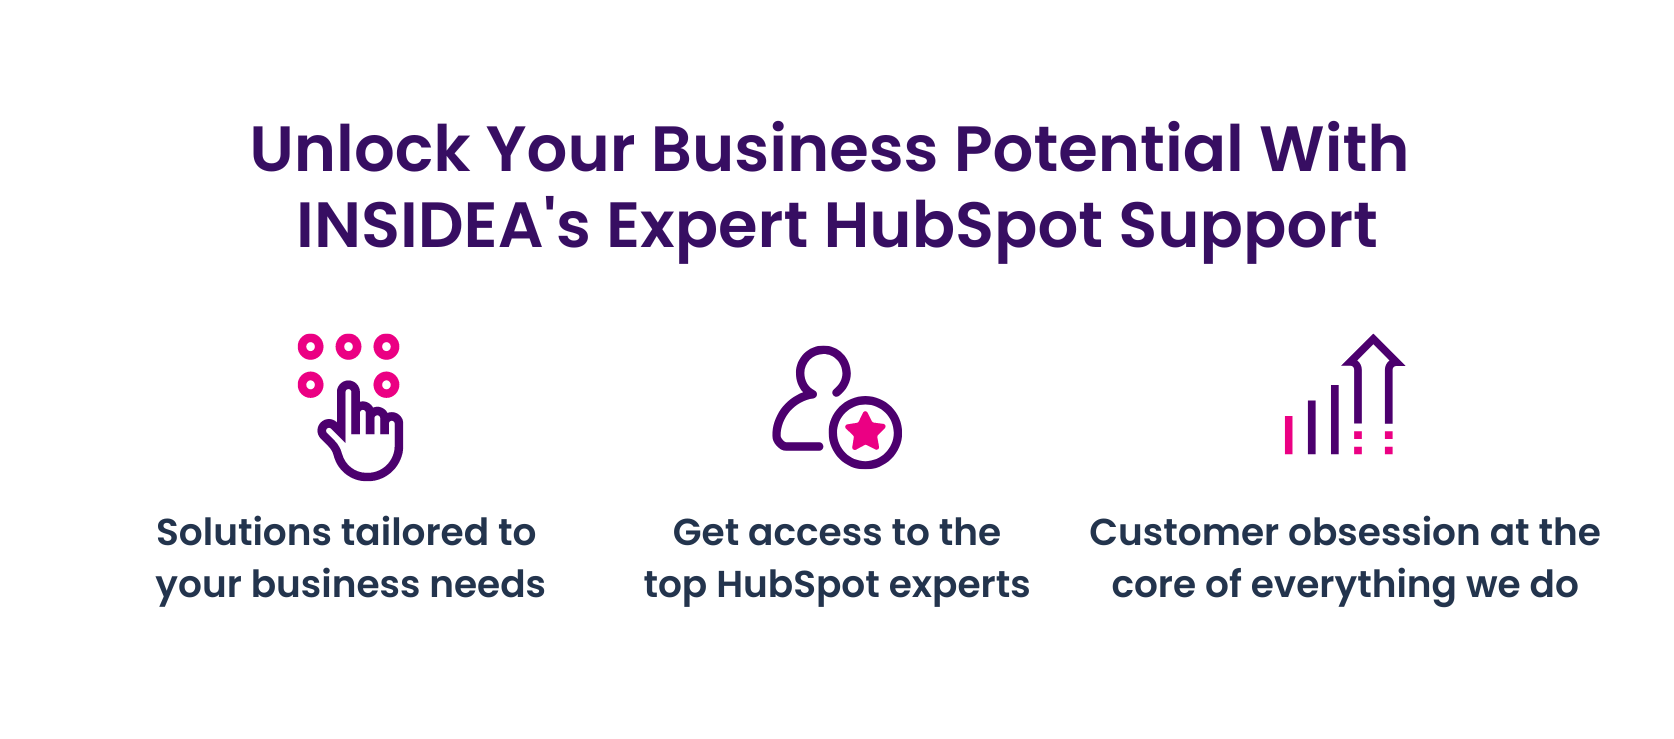 Unlock Your Business Potential with INSIDEA's Expert HubSpot Support